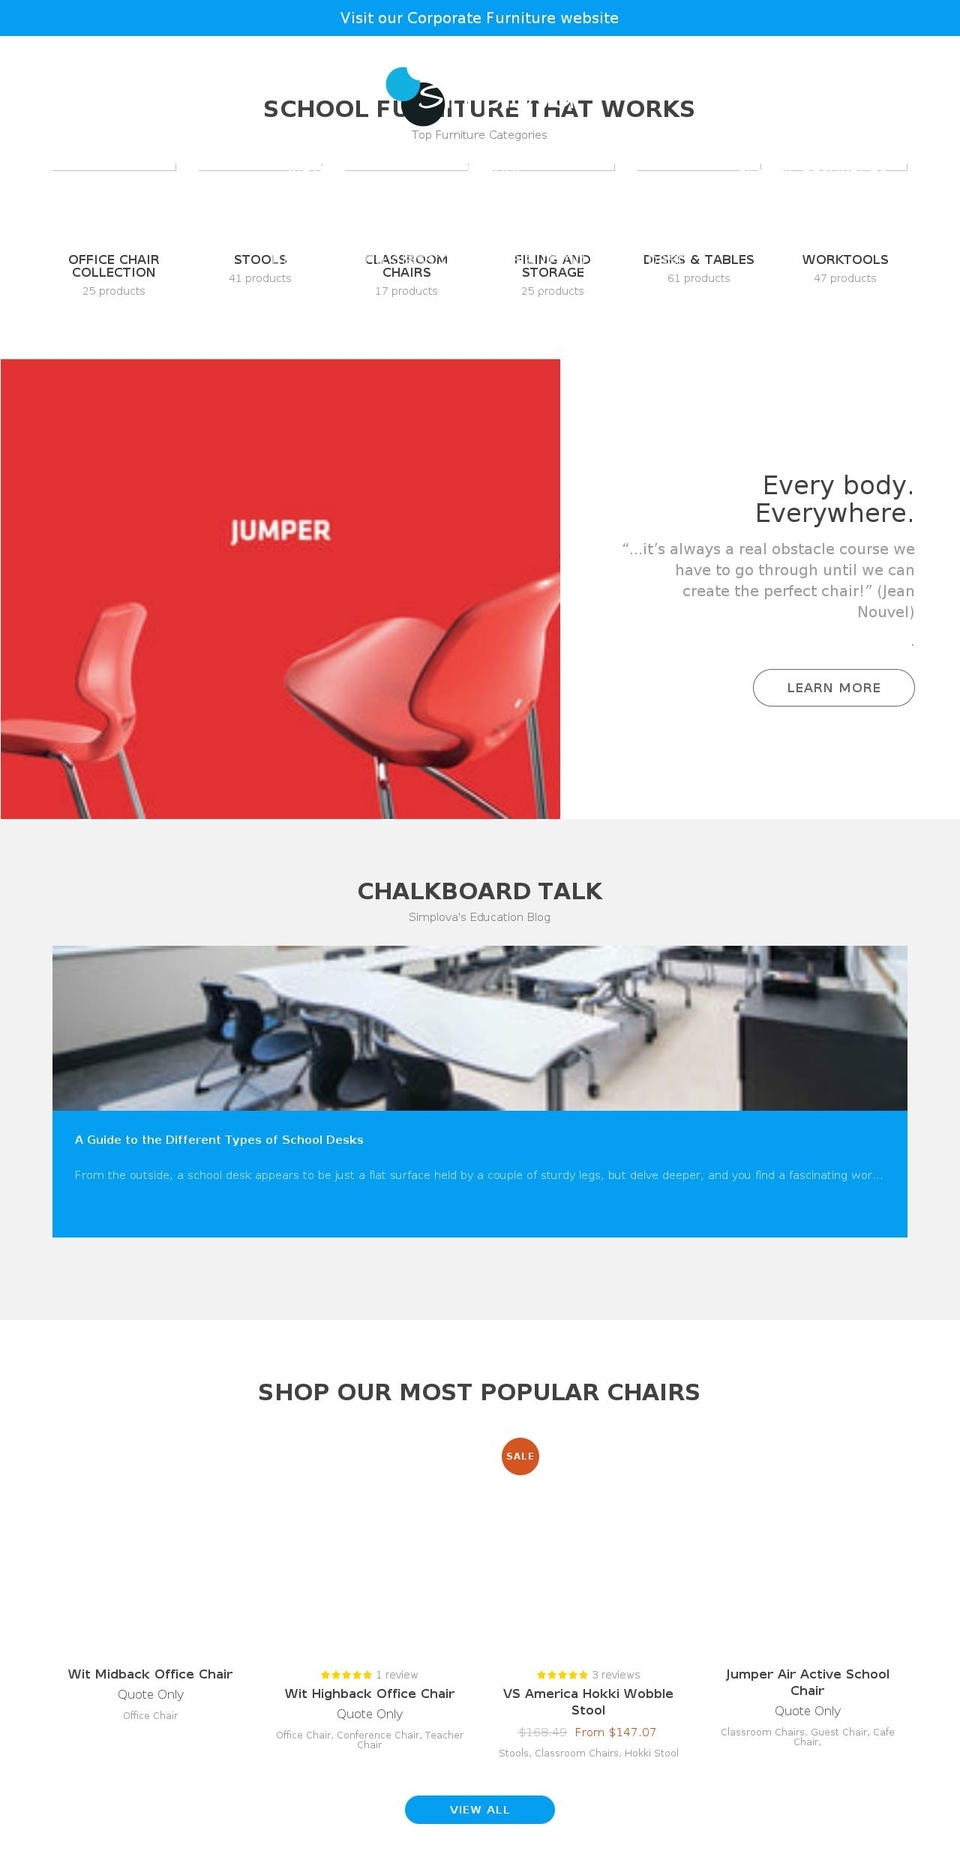 furniture Shopify theme site example schoolfurniture.ca